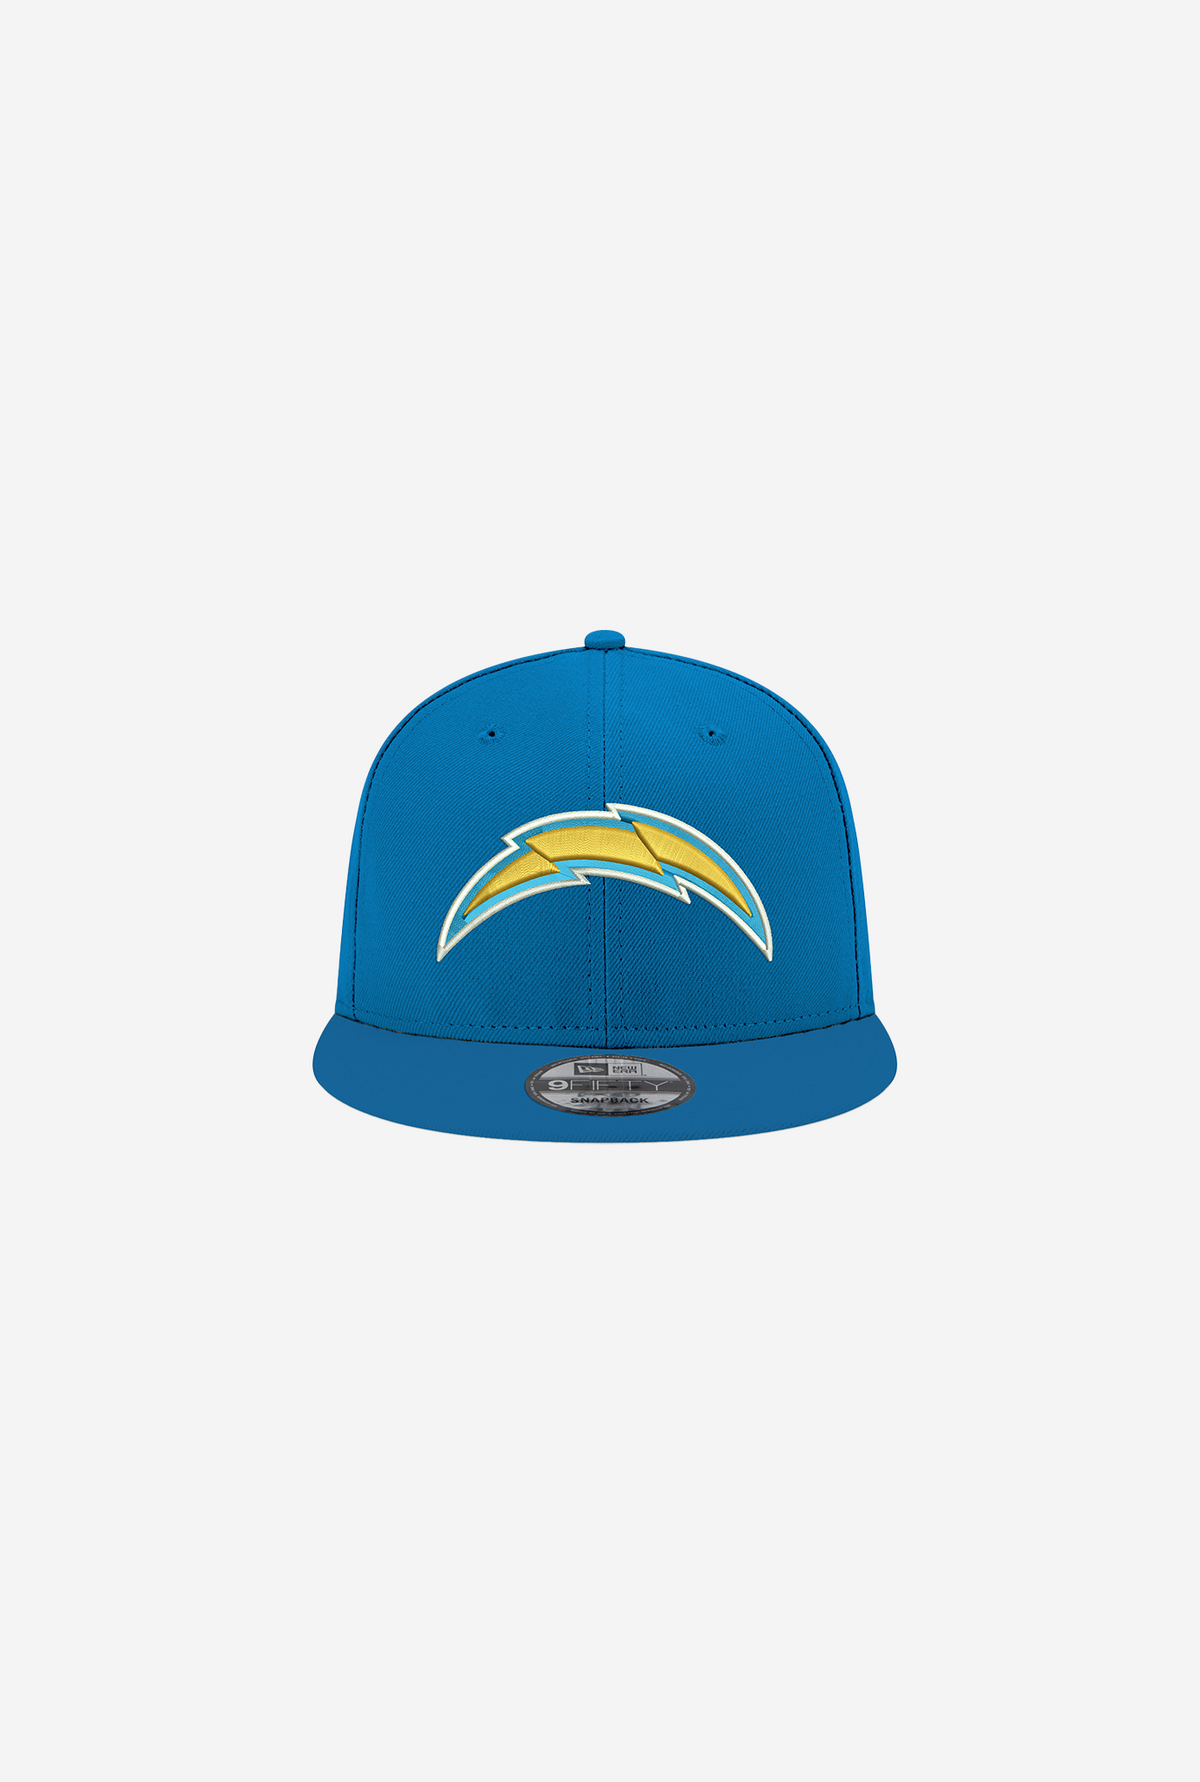 Los Angeles Chargers Basic 9FIFTY Snapback